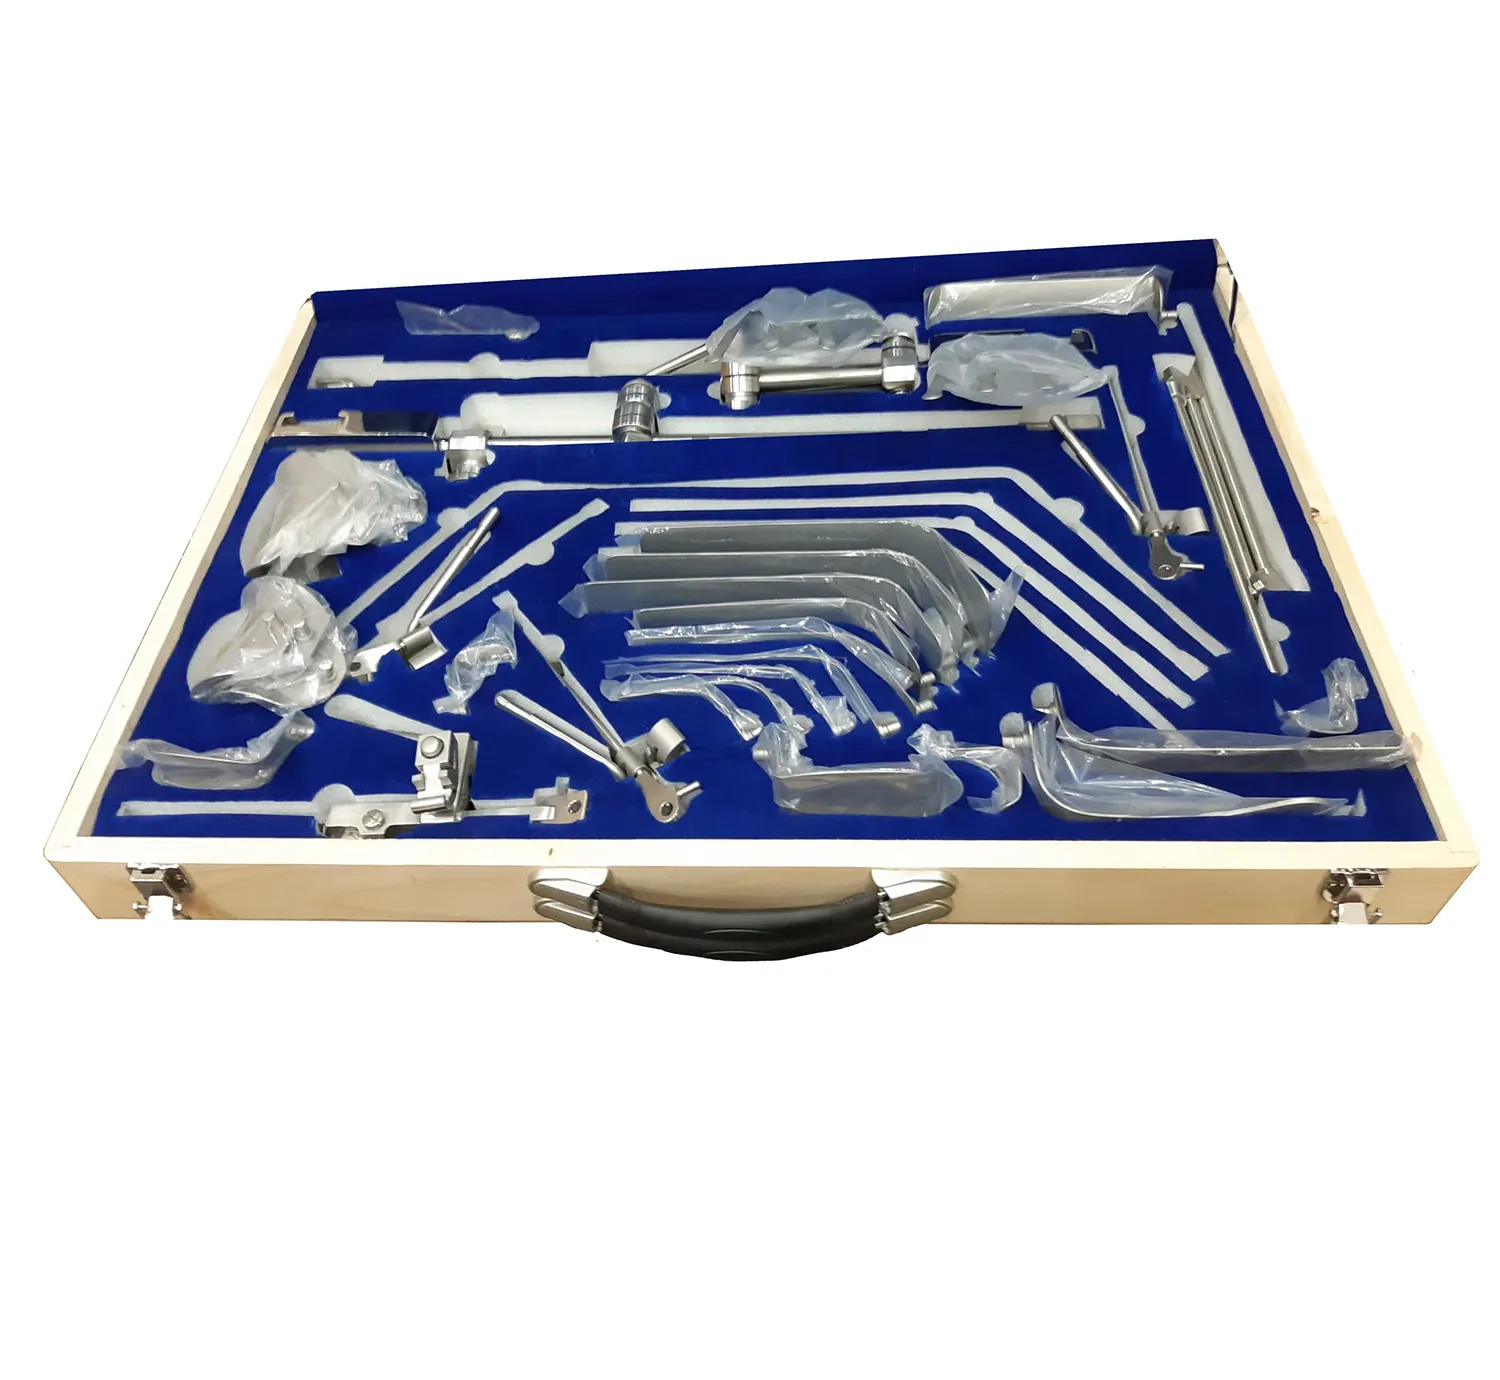 Thompson Retractor System Liver Transplant Surgical New Product General Surgery Basic Orthopedic Instruments Set